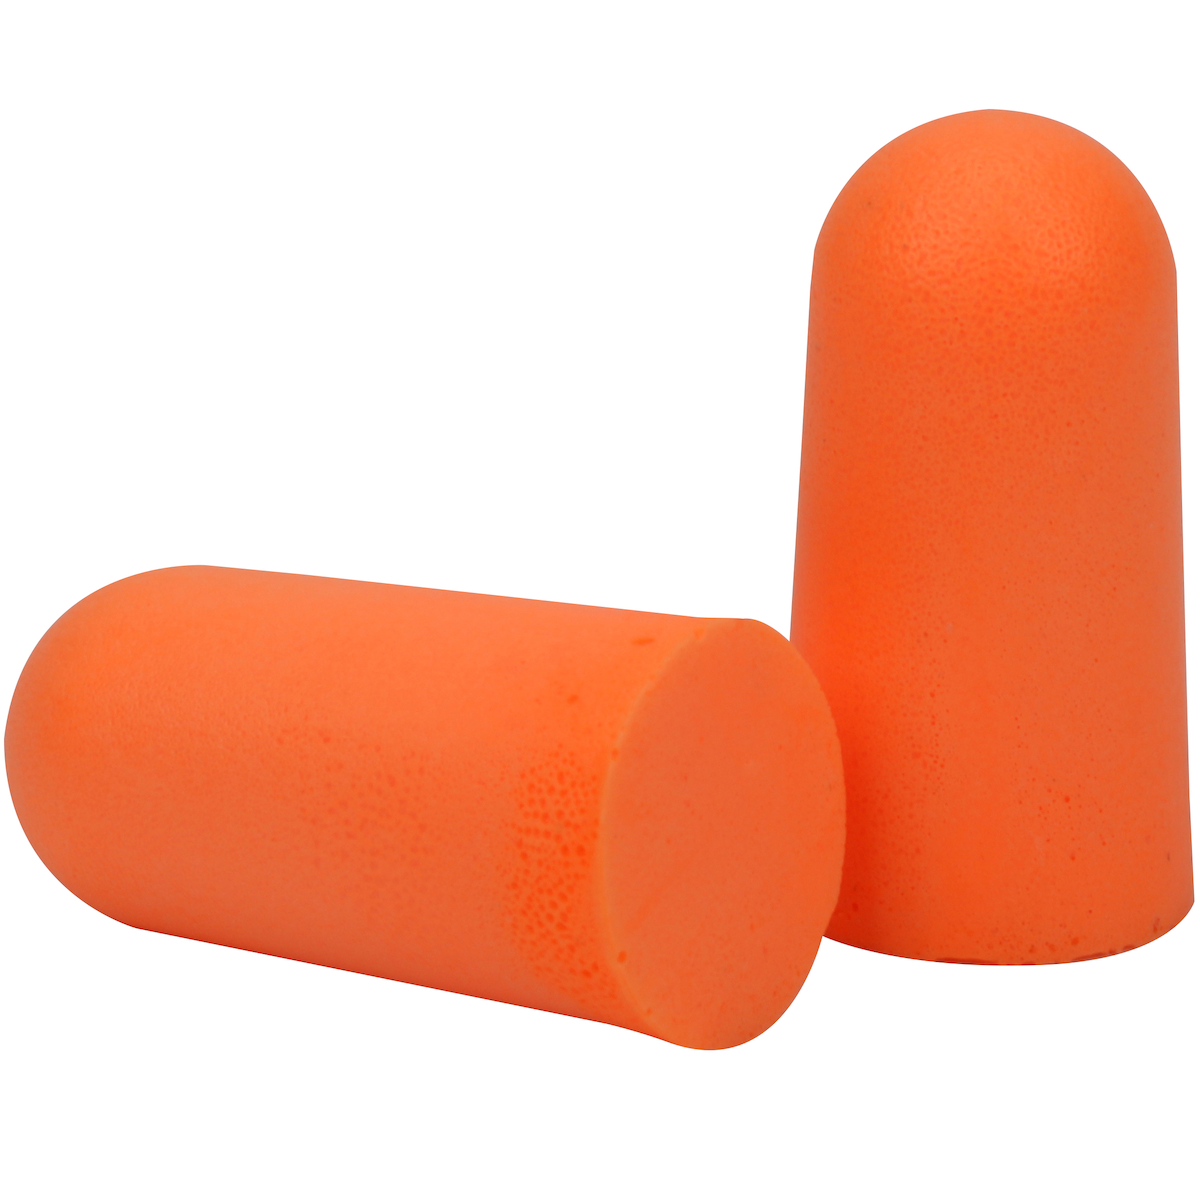 3M 318-4001 - E-A-R Push-Ins Softouch Earplugs 318-4001, Corded